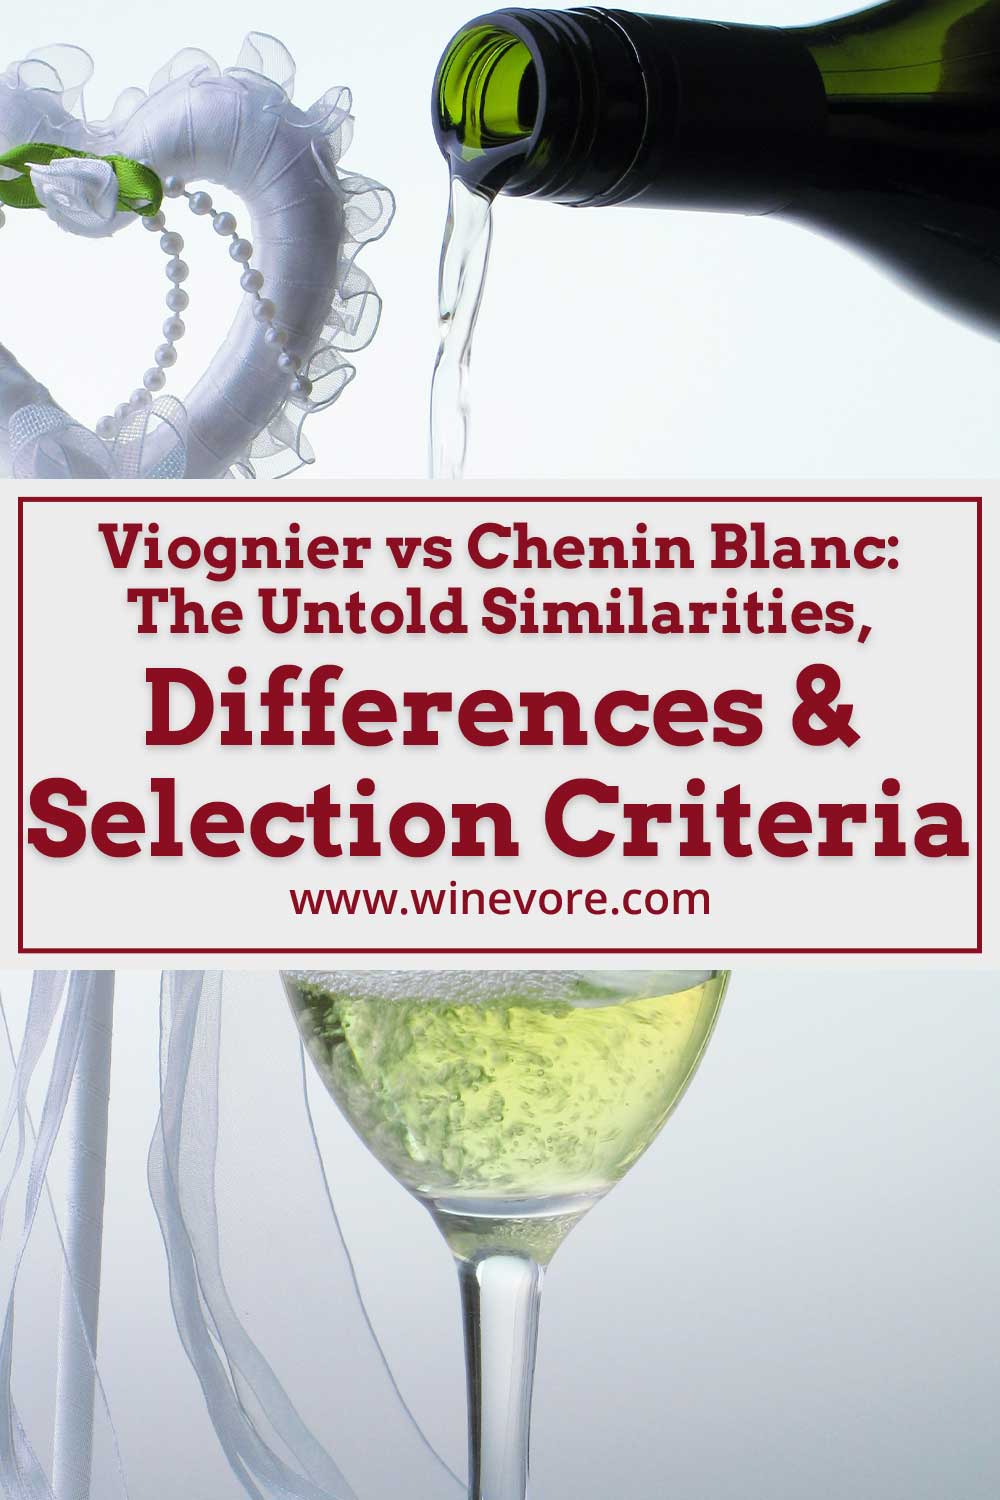 Wine being poured into a glass in front of a white background - Viognier vs Chenin Blanc.